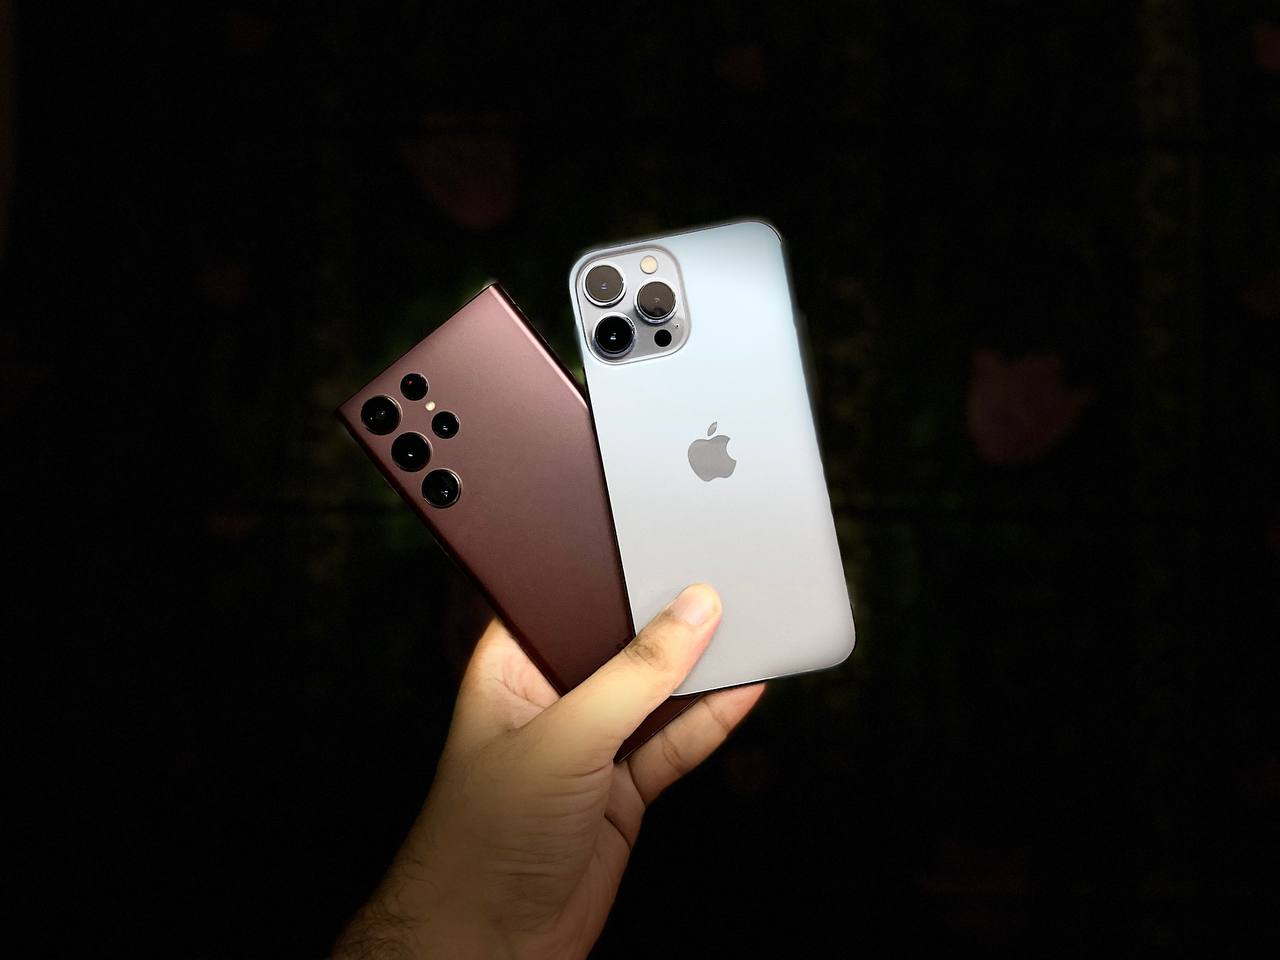 Ditching the S22 Ultra for the iPhone 13 Pro was fascinating